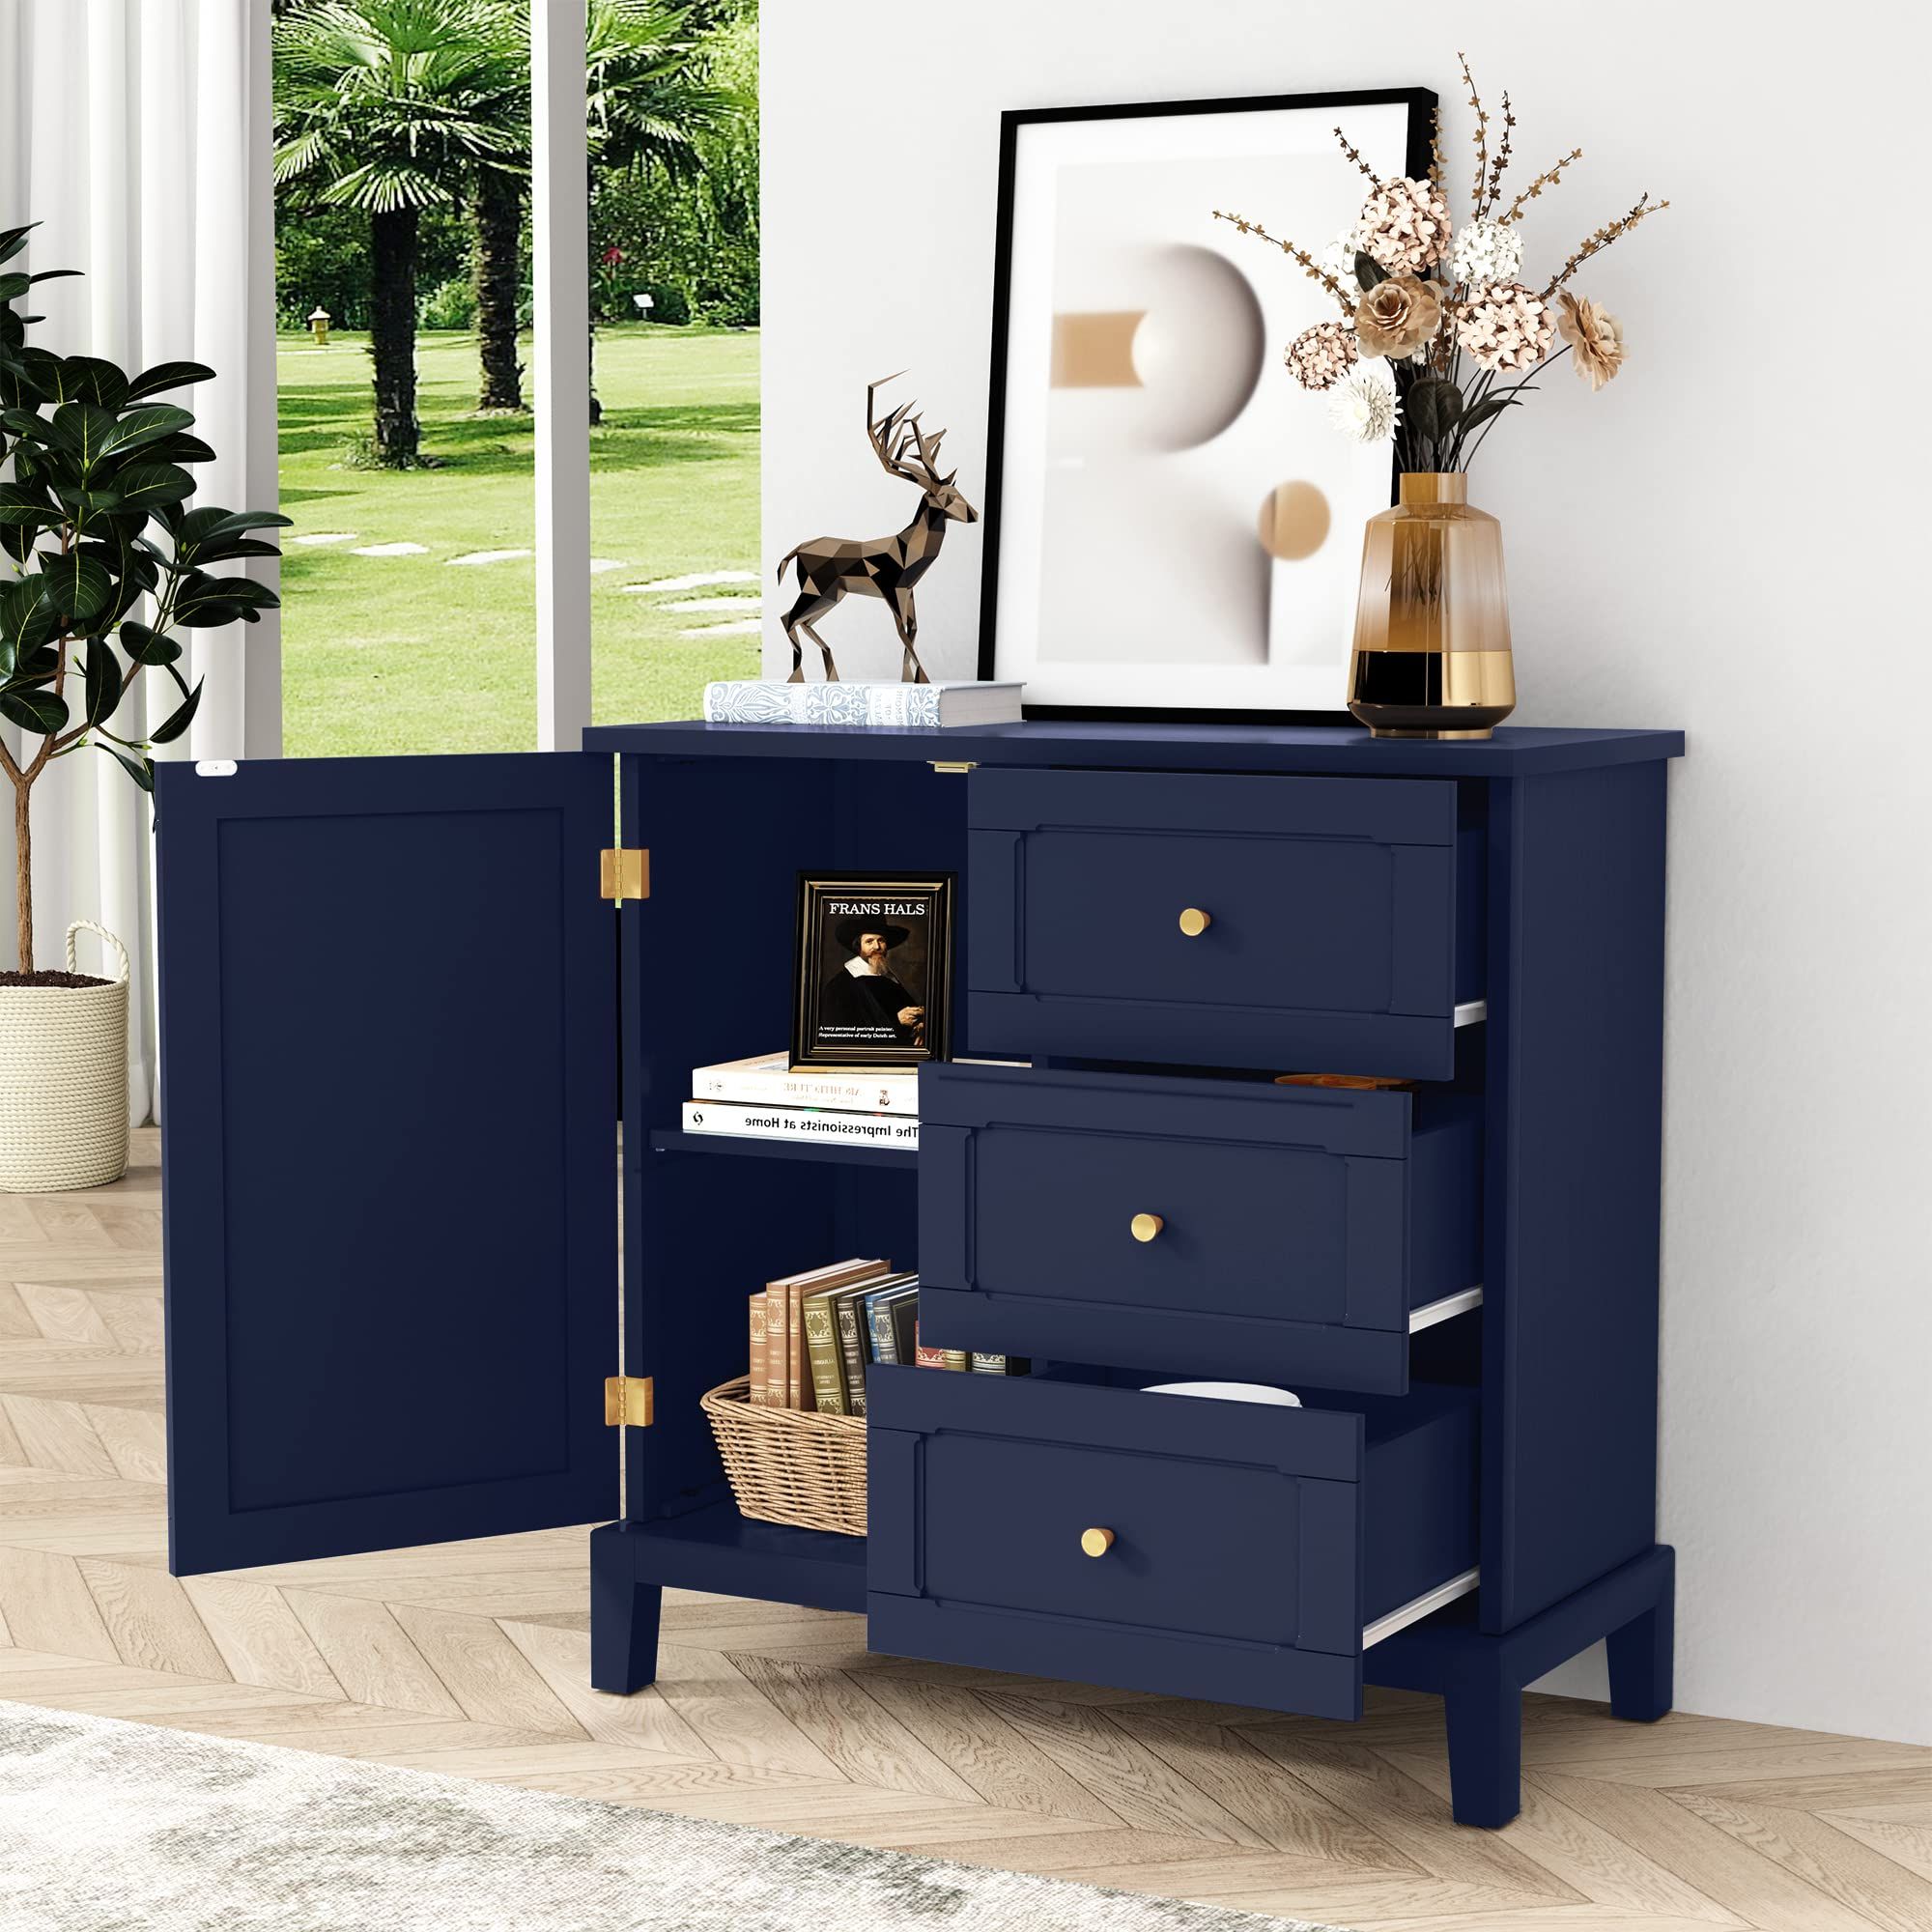 3 Drawers Sideboards Storage Cabinet In Well Liked Amazon: Hlr Accent Cabinet With 3 Drawers And Door, Wooden Storage  Cabinet With Shelves, Sideboard For Living Room, Bedroom, Entryway, Navy  Blue : Home & Kitchen (Photo 3 of 10)